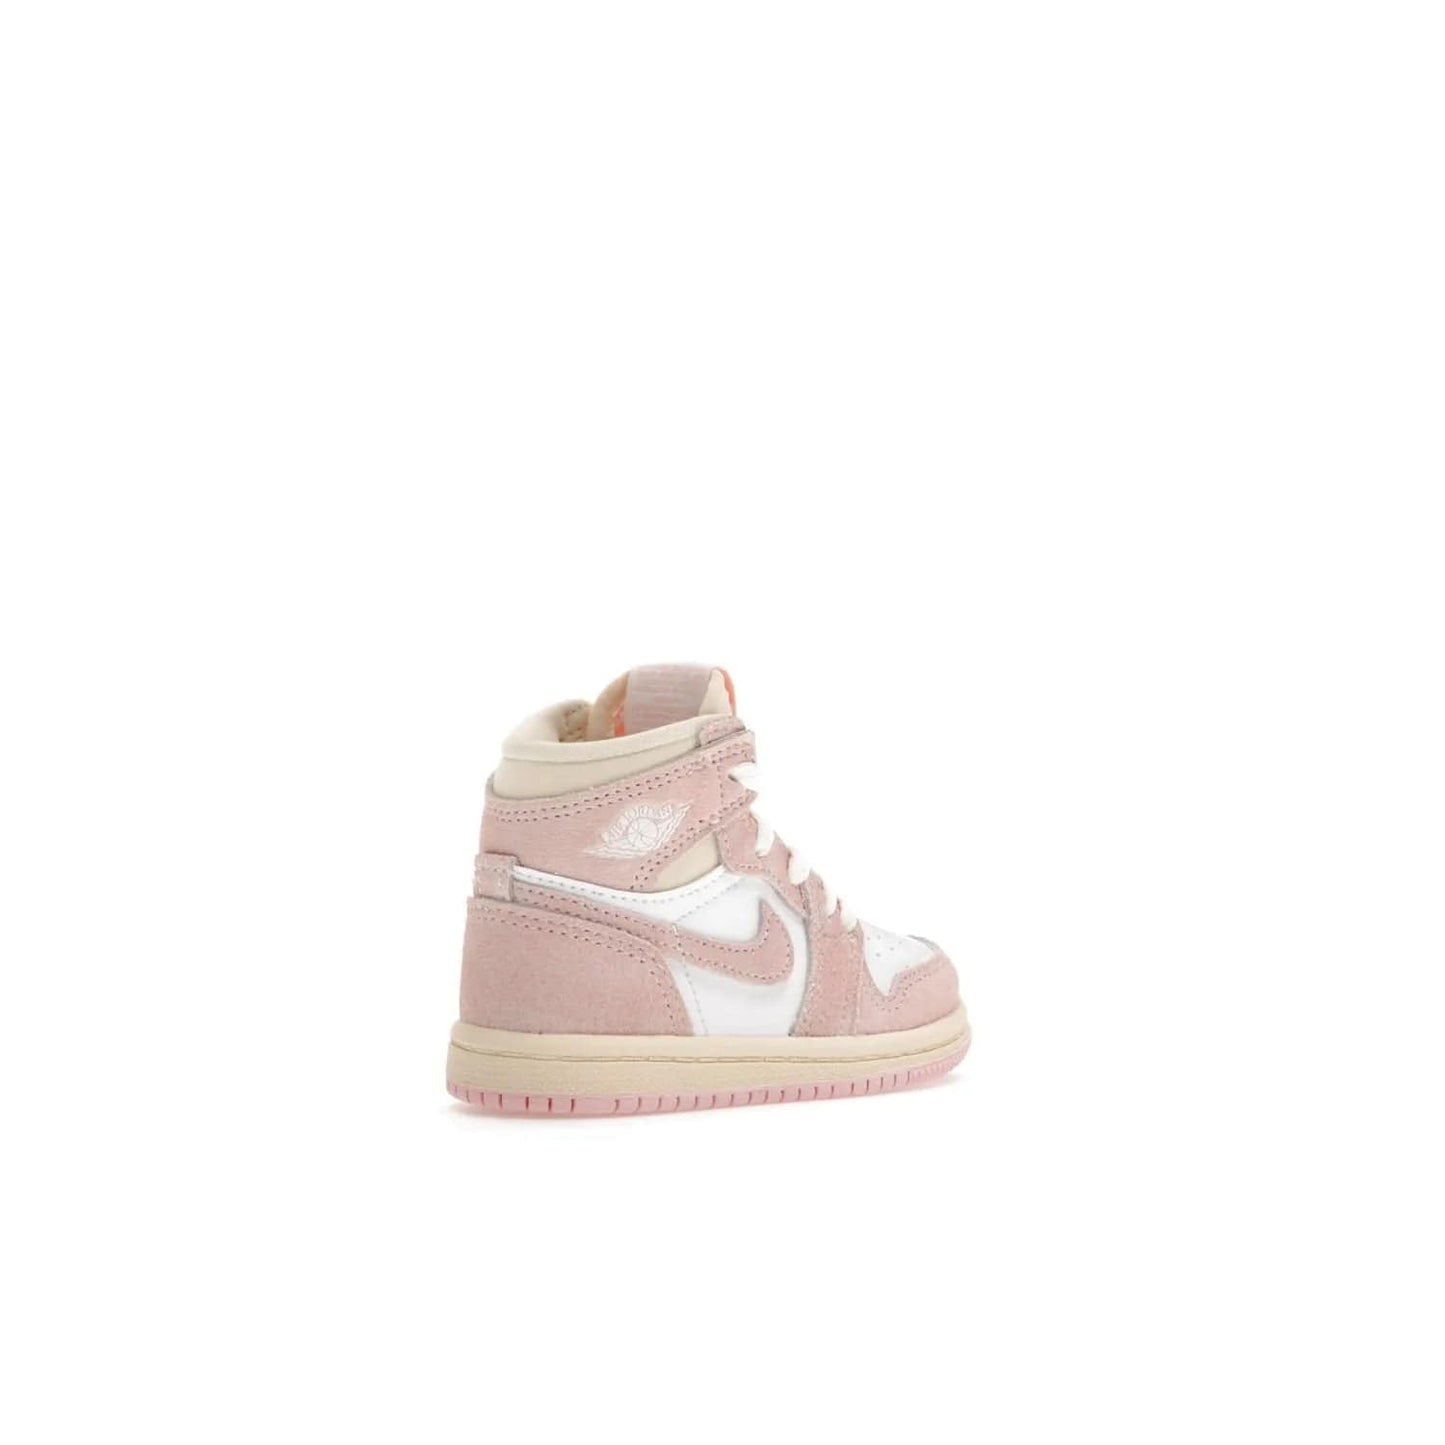 Jordan 1 Retro High OG Washed Pink (TD) - Image 33 - Only at www.BallersClubKickz.com - Retro style meets modern comfort: Introducing the Jordan 1 High OG Washed Pink (TD). Combining Atmosphere/White/Muslin/Sail colors with a high-rise silhouette, these shoes will be an instant classic when they release April 22, 2023.